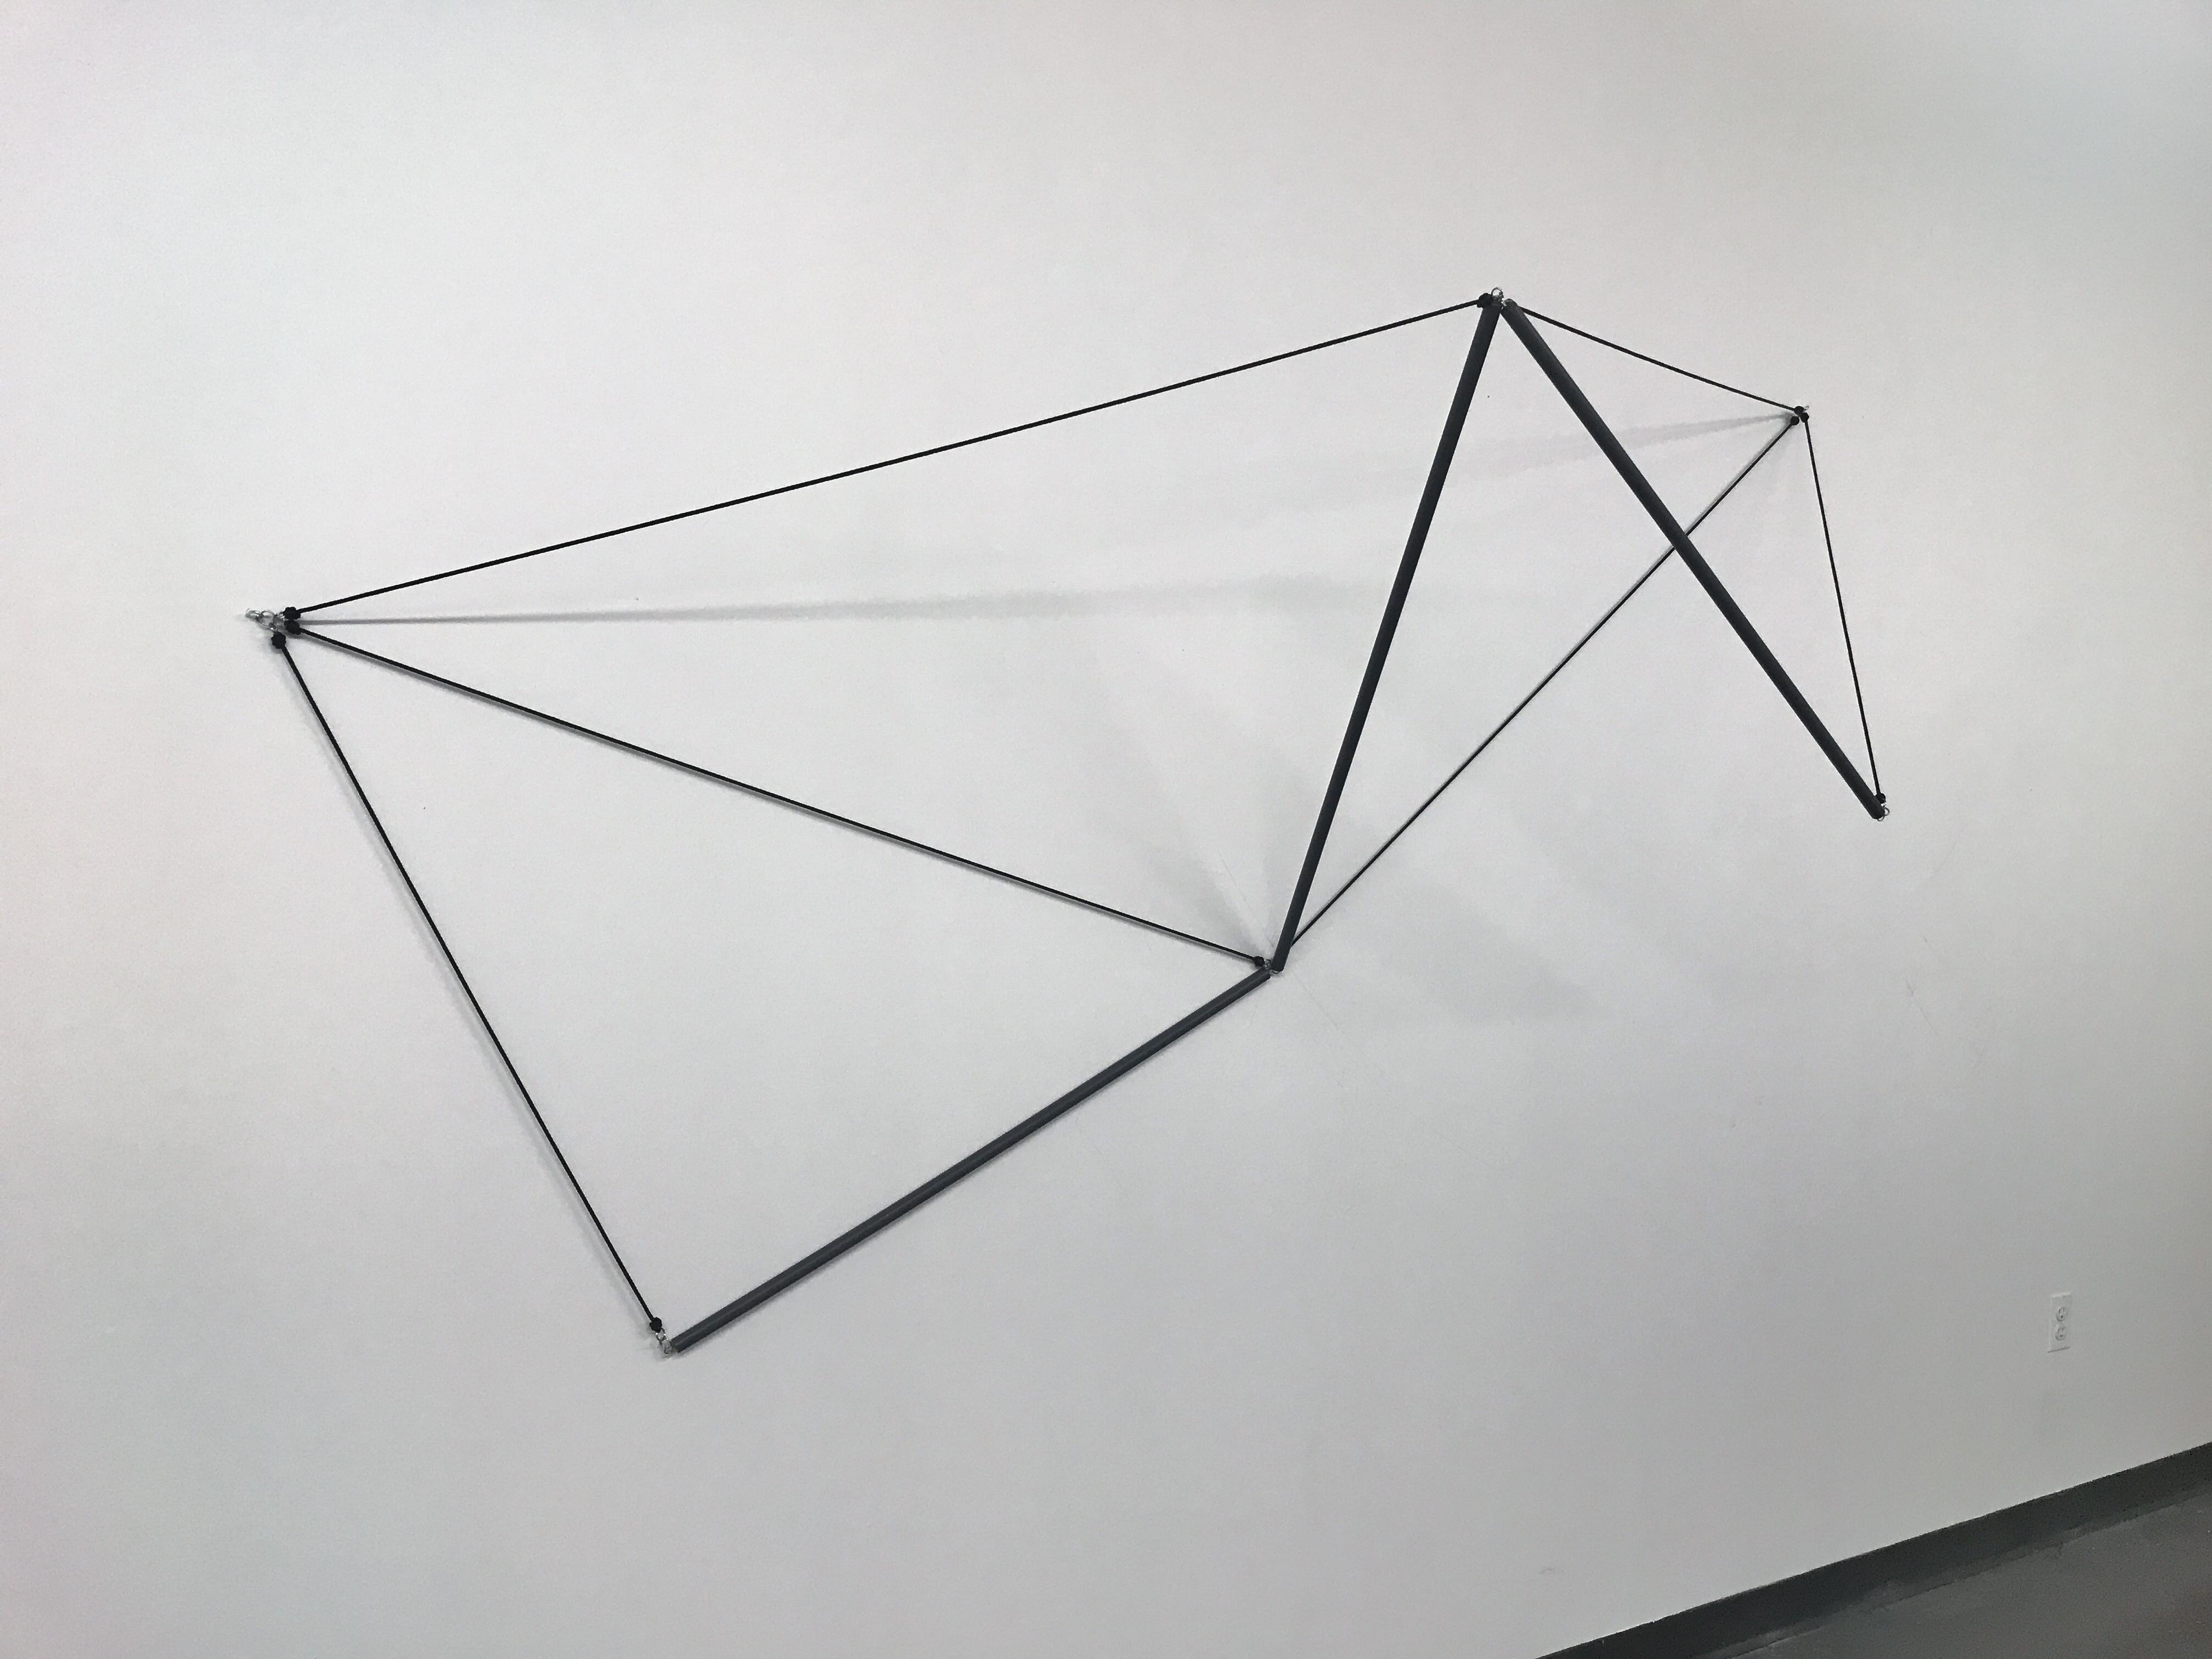 Dishtowel Fold, 2018, polyester cord, PVC rod, stainless steel, 94.5 x 49 x26 in - Sculpture by Daniel G. Hill